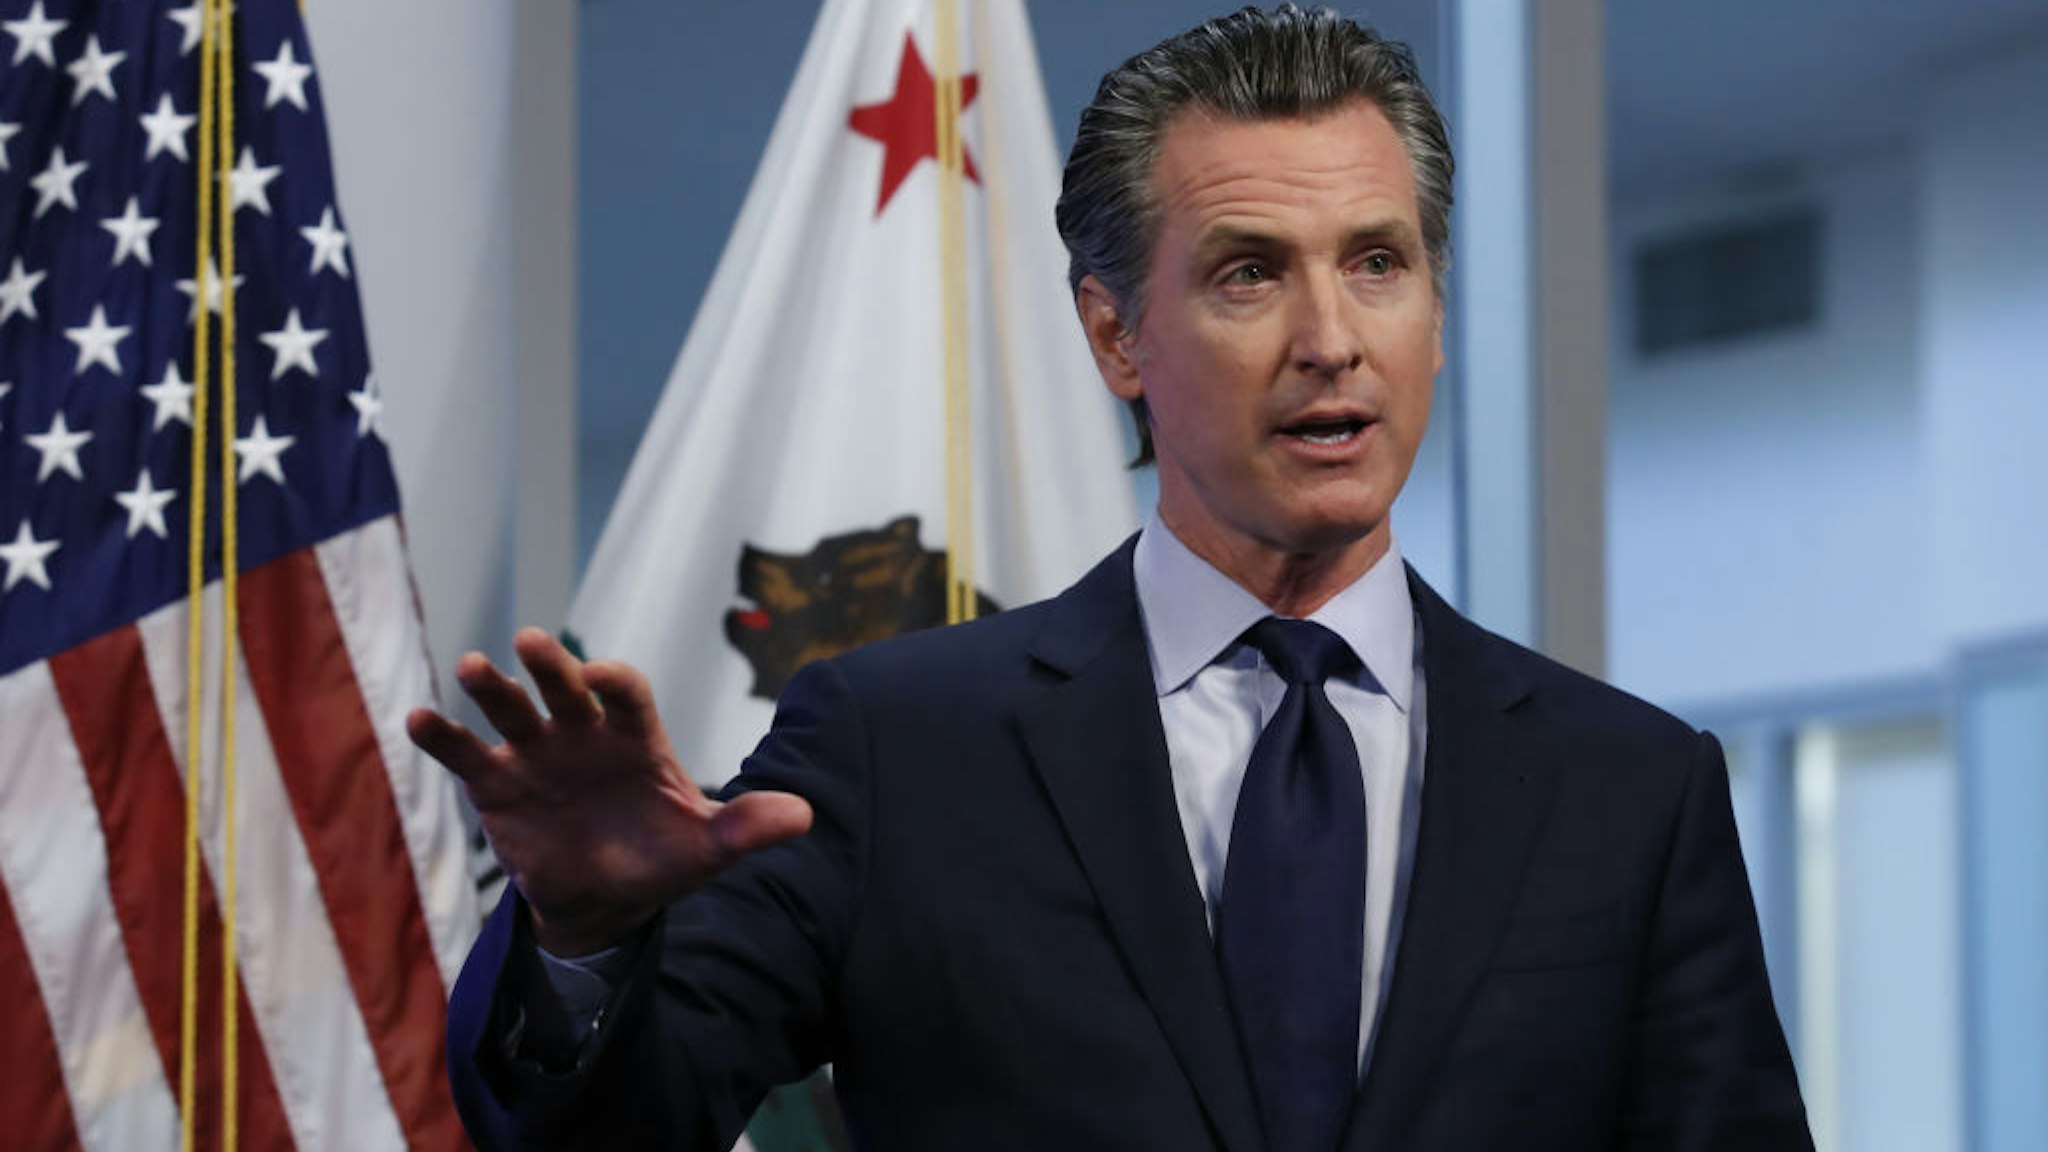 Gavin Newsom, governor of California, speaks during a news conference in Sacramento, California, U.S., on Tuesday, April 14, 2020. Newsom outlined his plan to lift restrictions in the most-populous U.S. state, saying a reopening depends on meeting a series of benchmarks that would remake daily life for 40 million residents. Photographer: Rich Pedroncelli/AP/Bloomberg via Getty Images